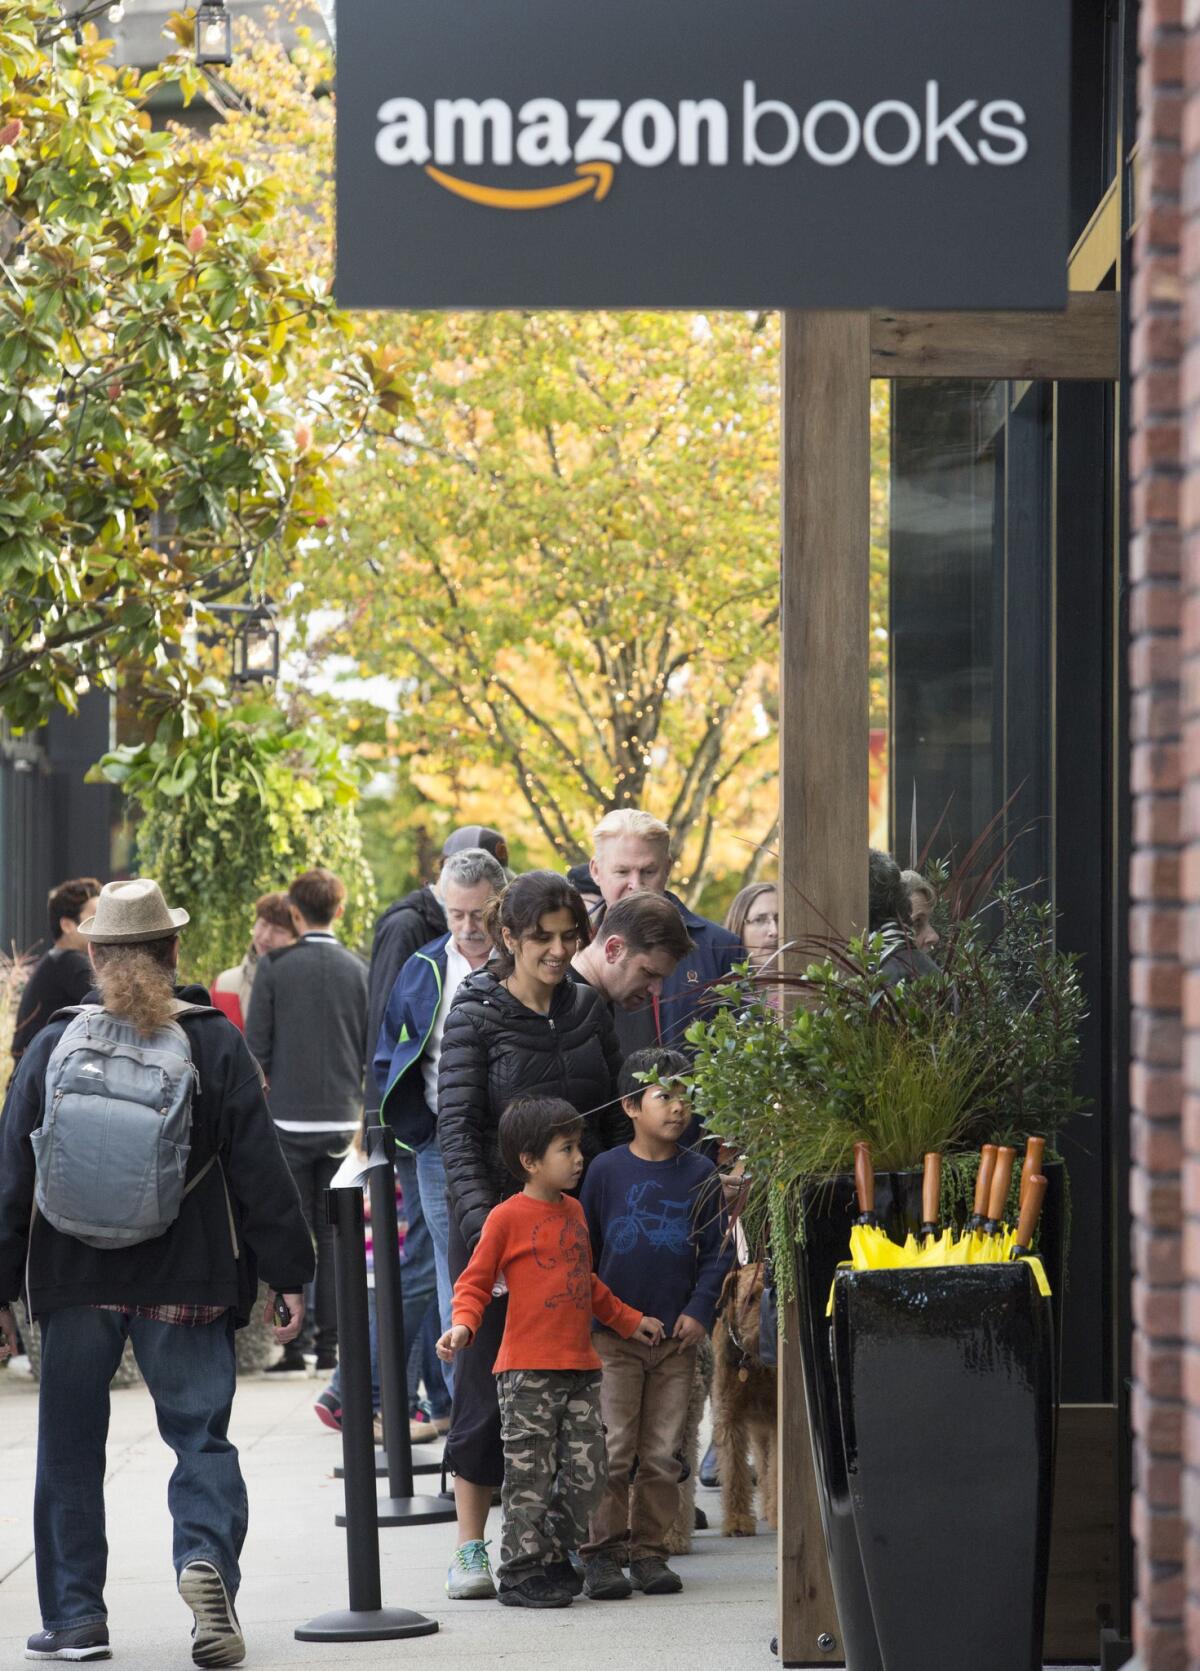 Amazon opened its first bricks-and-mortar bookstore last November in Seattle.